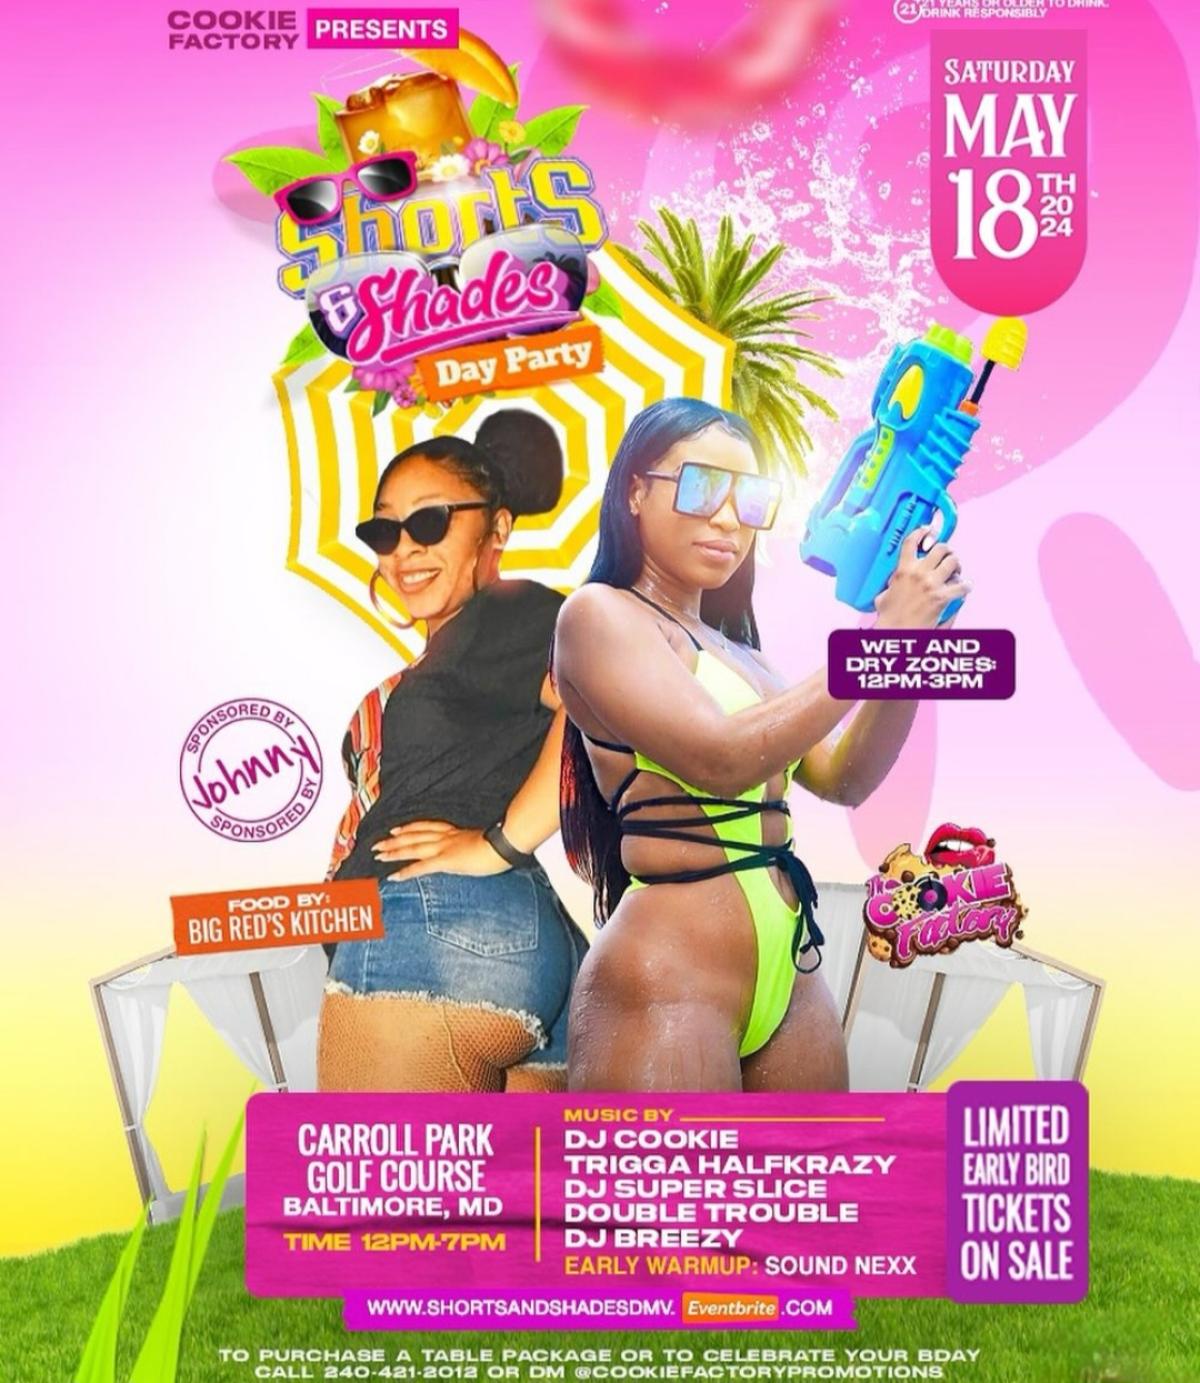 Shorts & Shades  flyer or graphic.